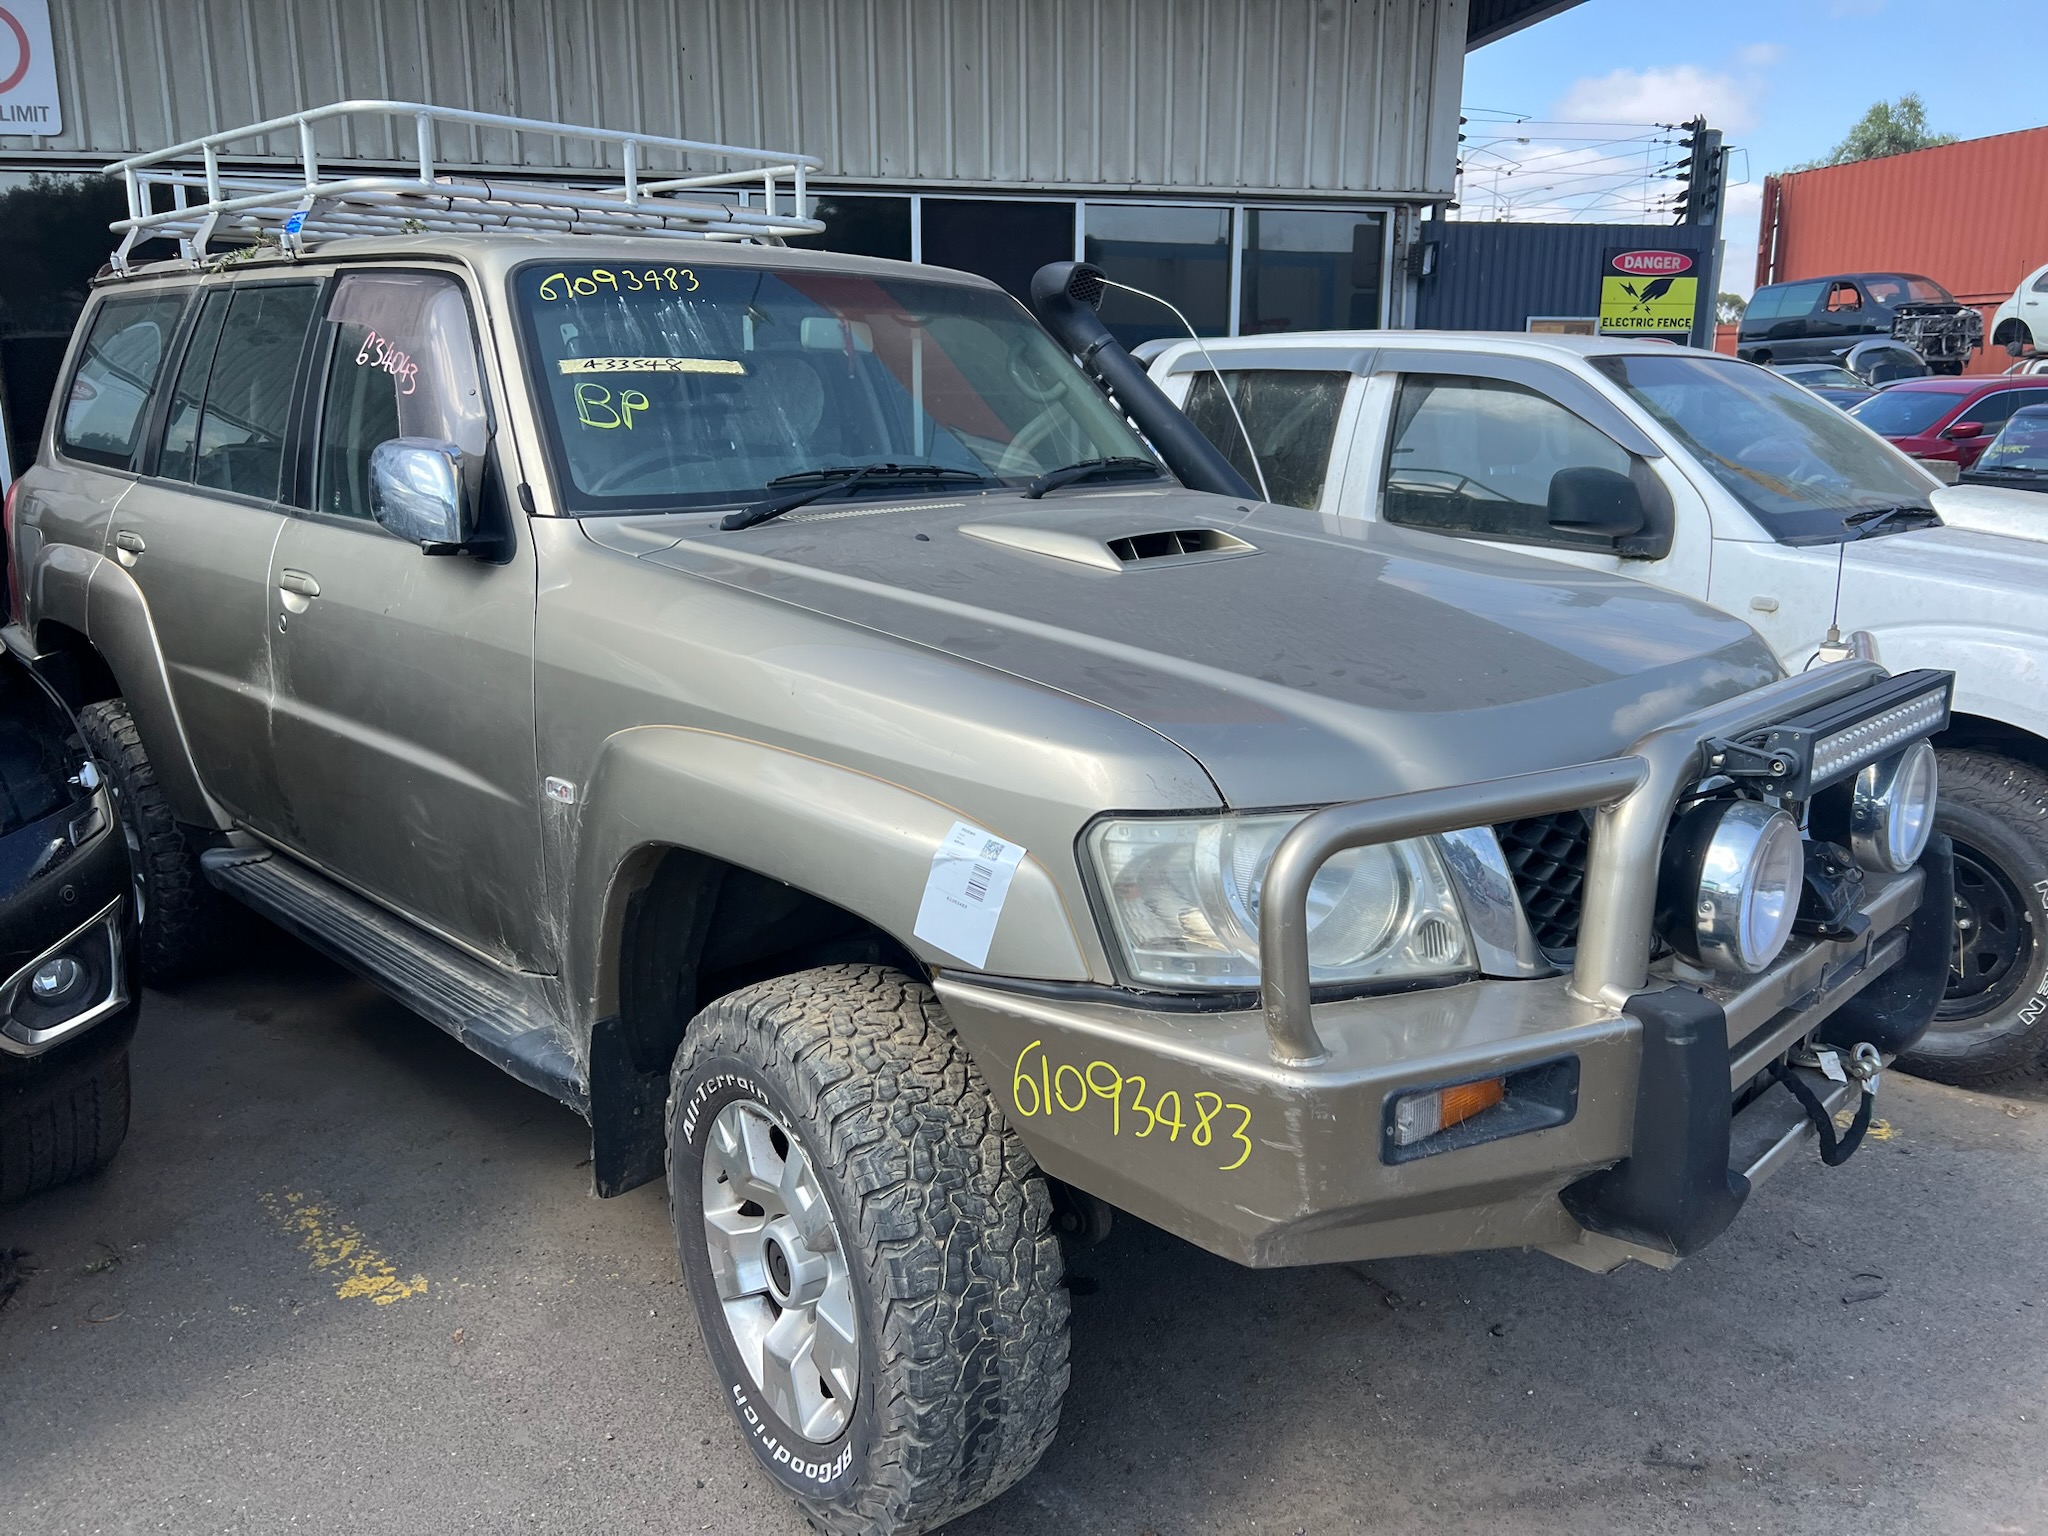 PARTS AVAILABLE FOR NISSAN PATROL Y61 GU ST WAGON ZD30 DIESEL GOLD 2007 WRECKING